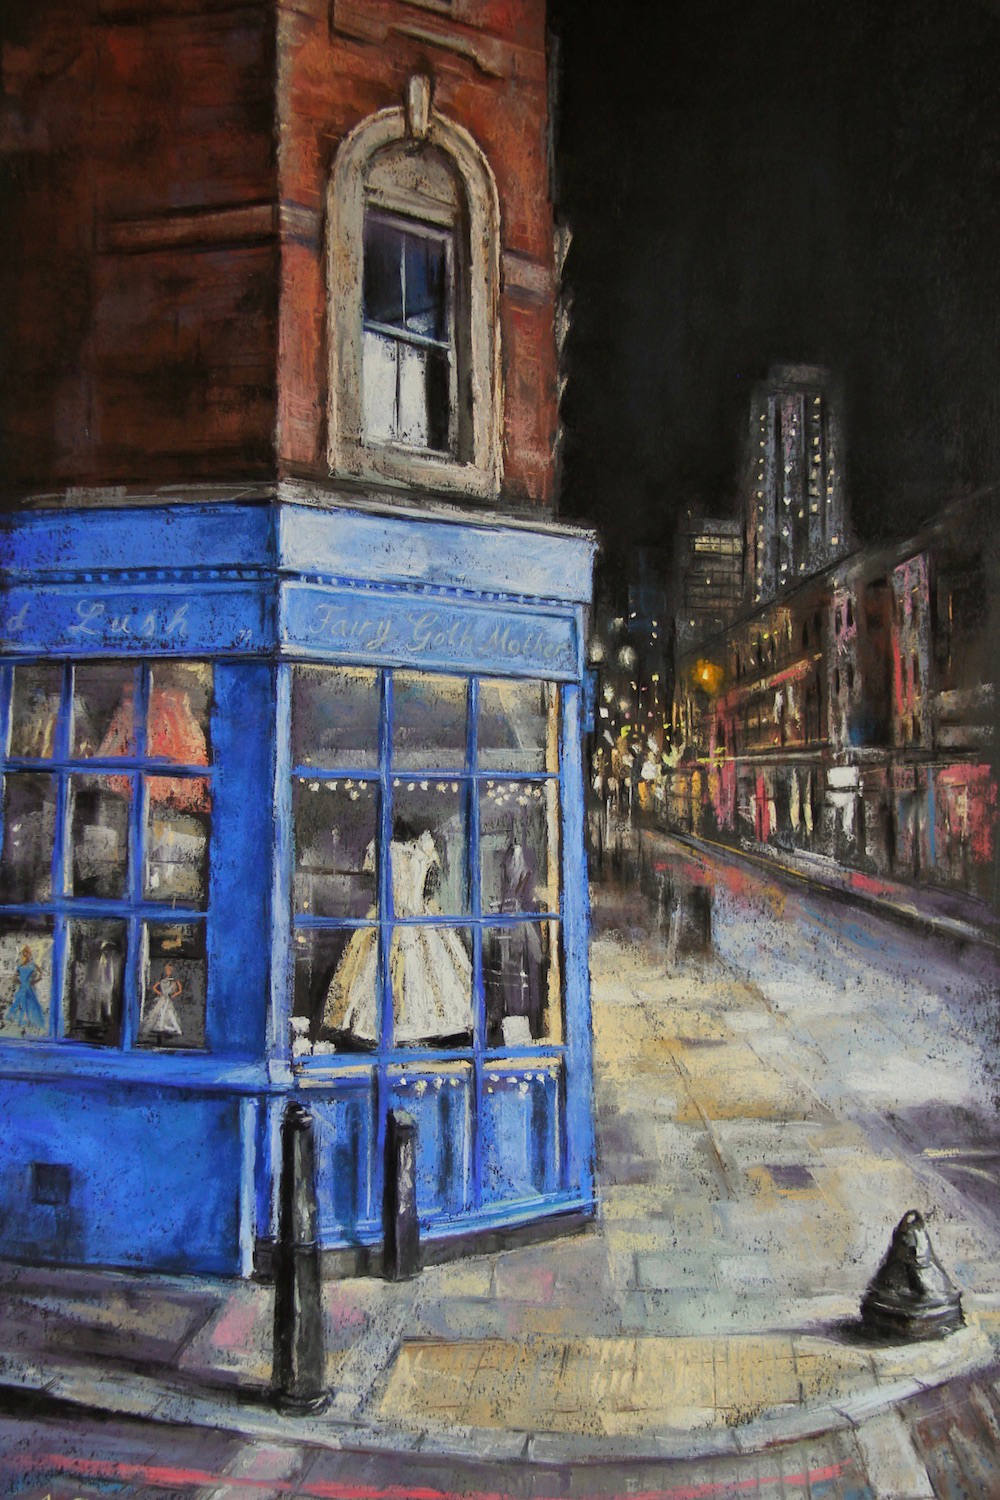 A painting of the corner of Fashion Street, where old storefront Fair Goth Mother used to be, Whitechapel.